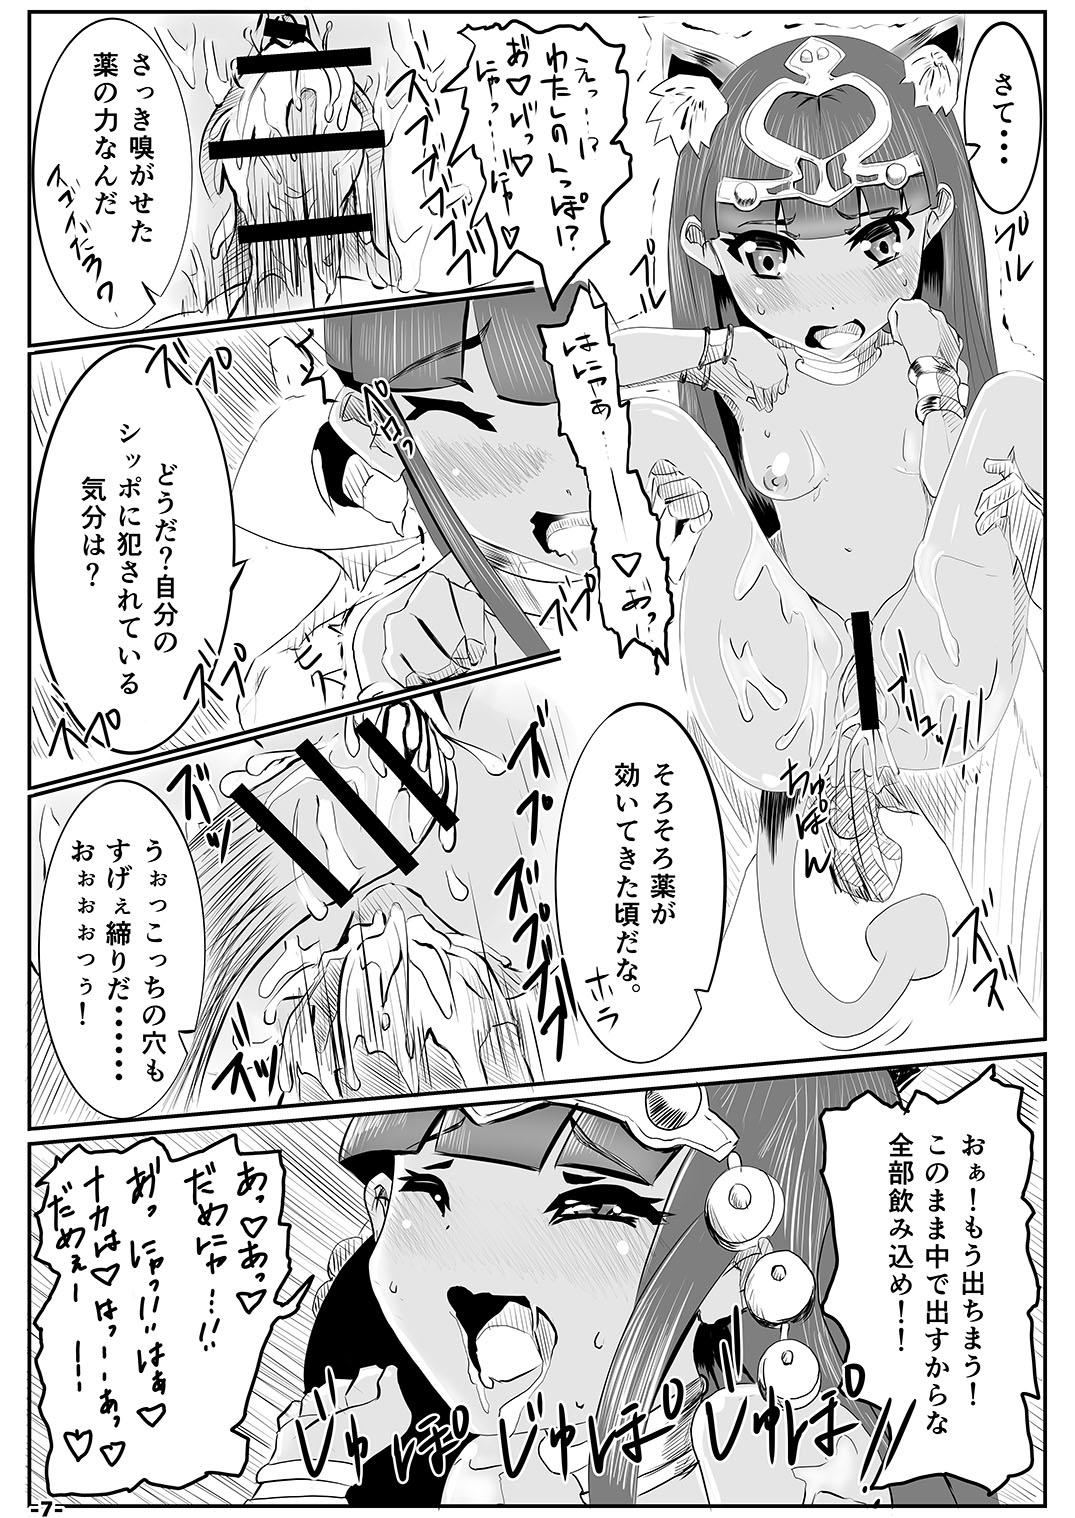 Peeing Yamiochi 2nd - Puzzle and dragons Lezbi - Page 6